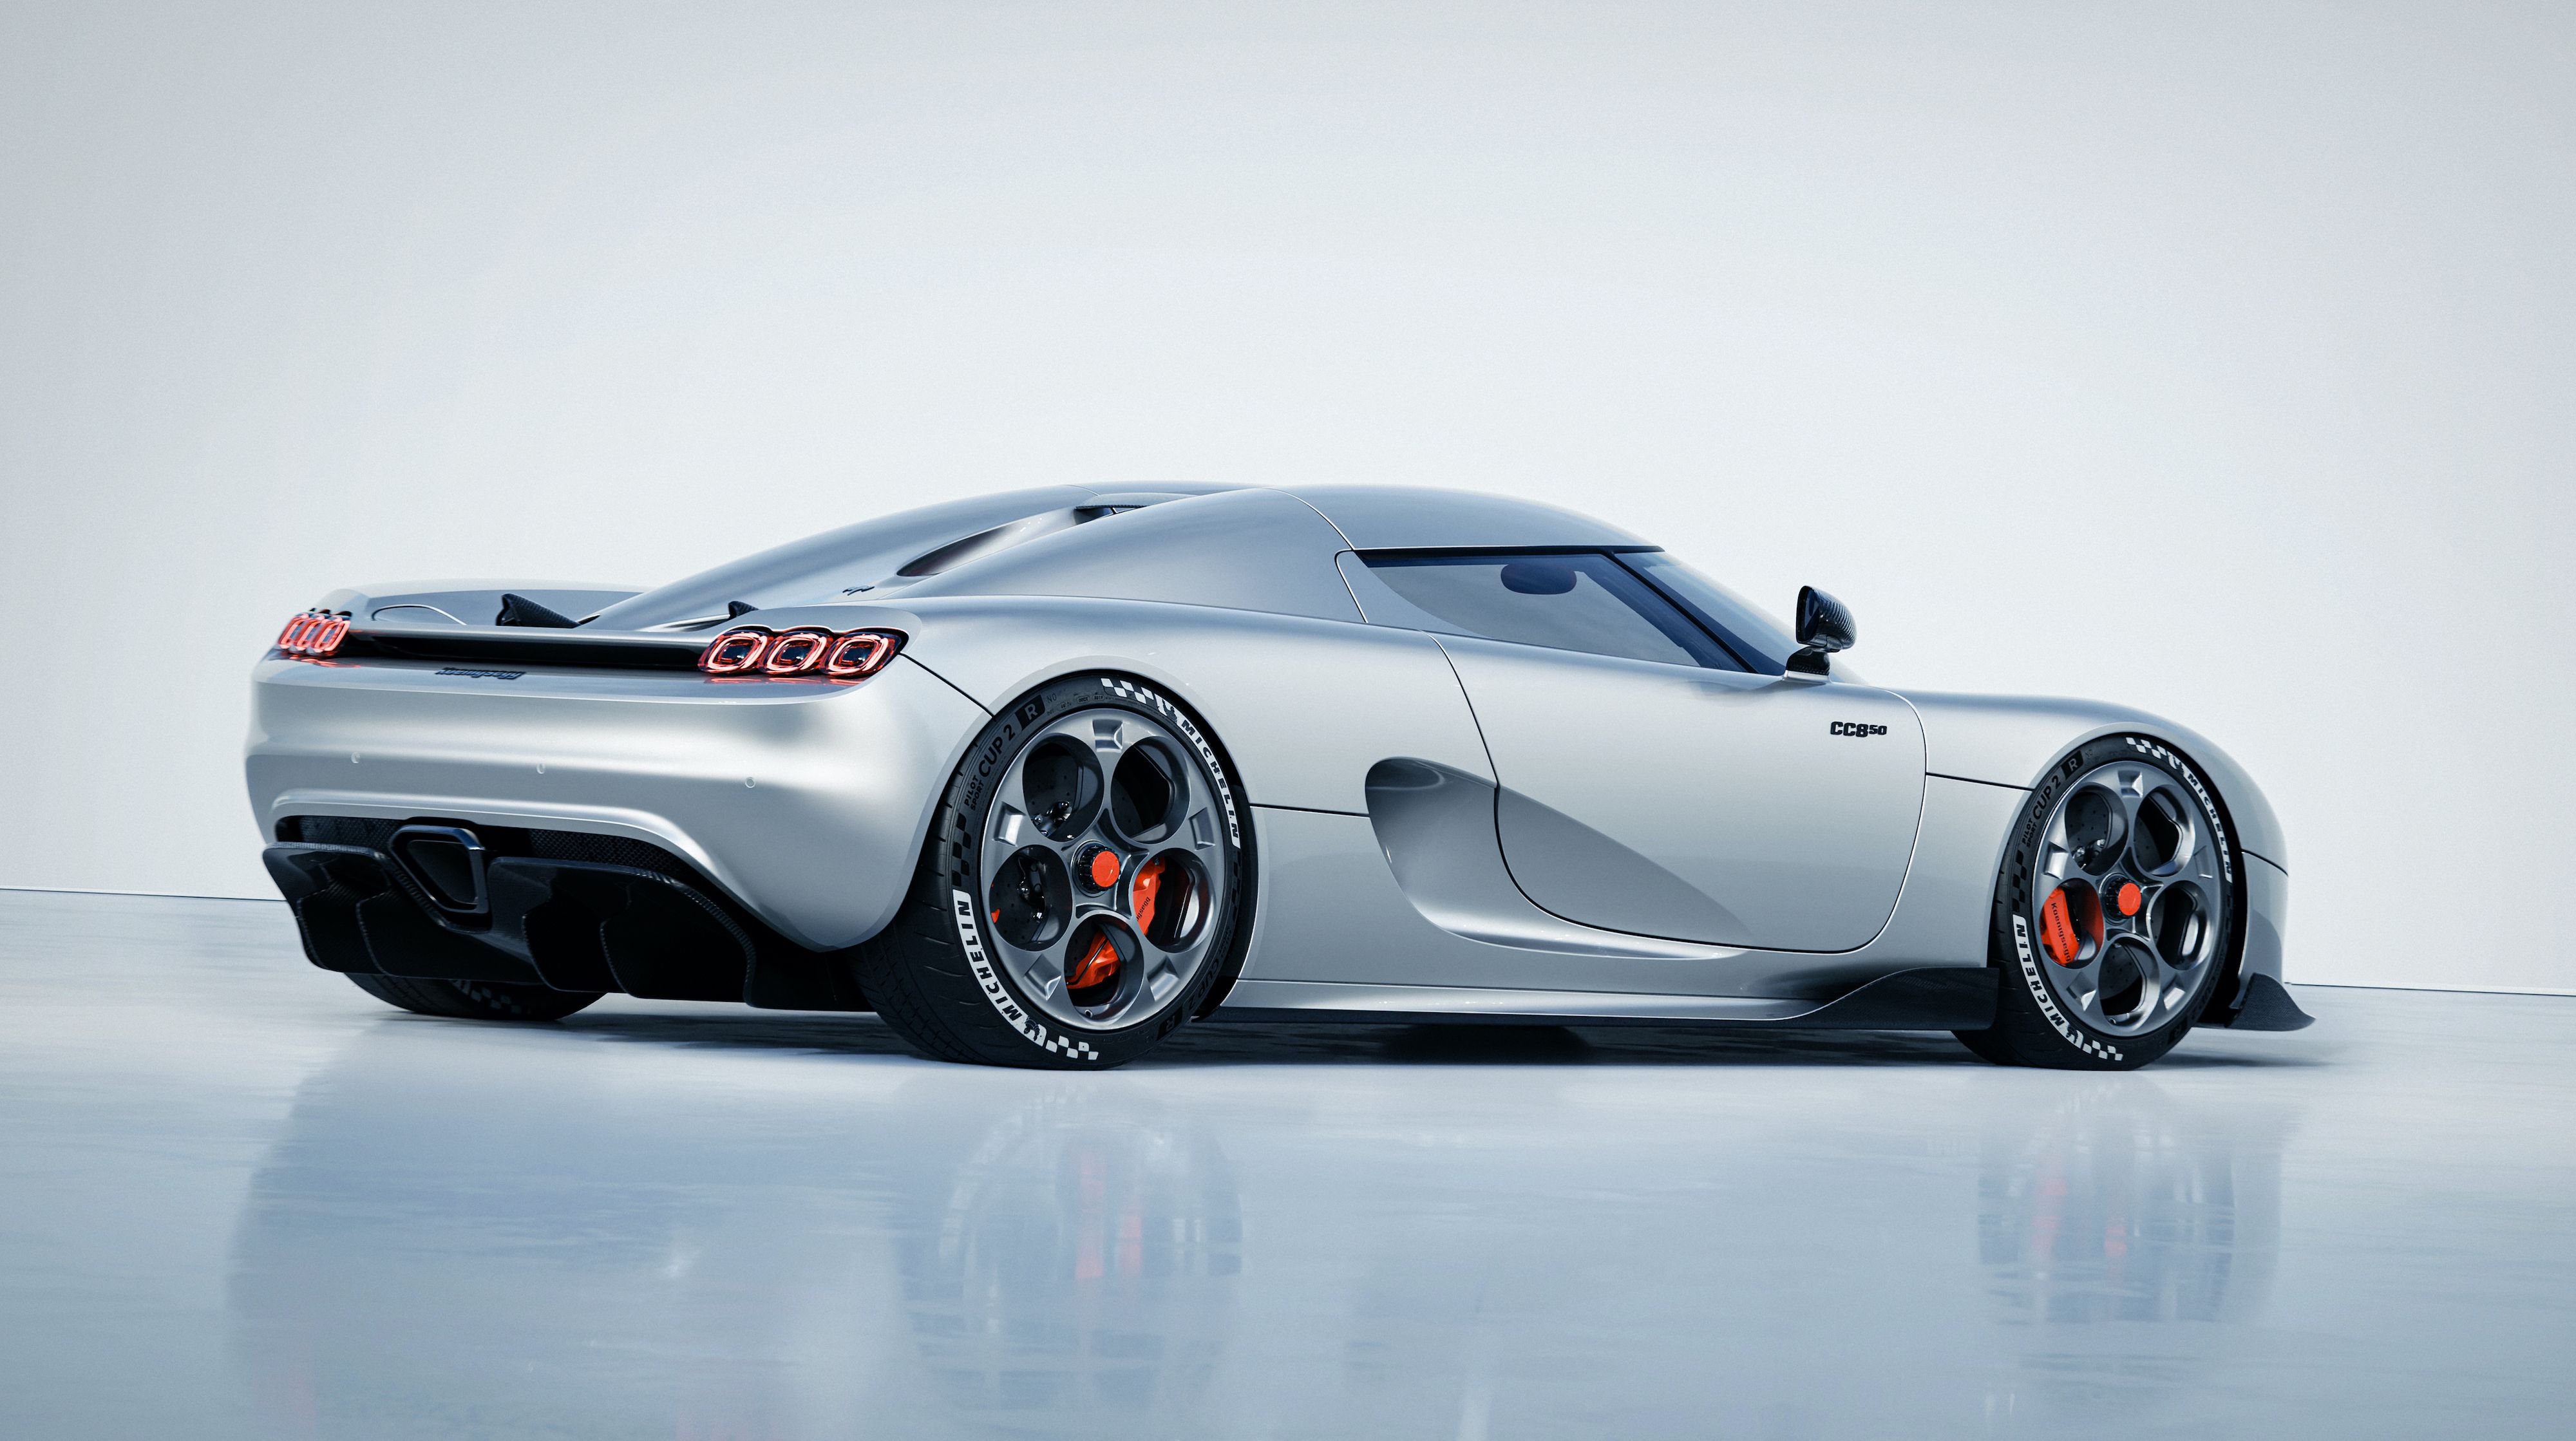 Koenigsegg Cars: Reviews, Pricing, and Specs